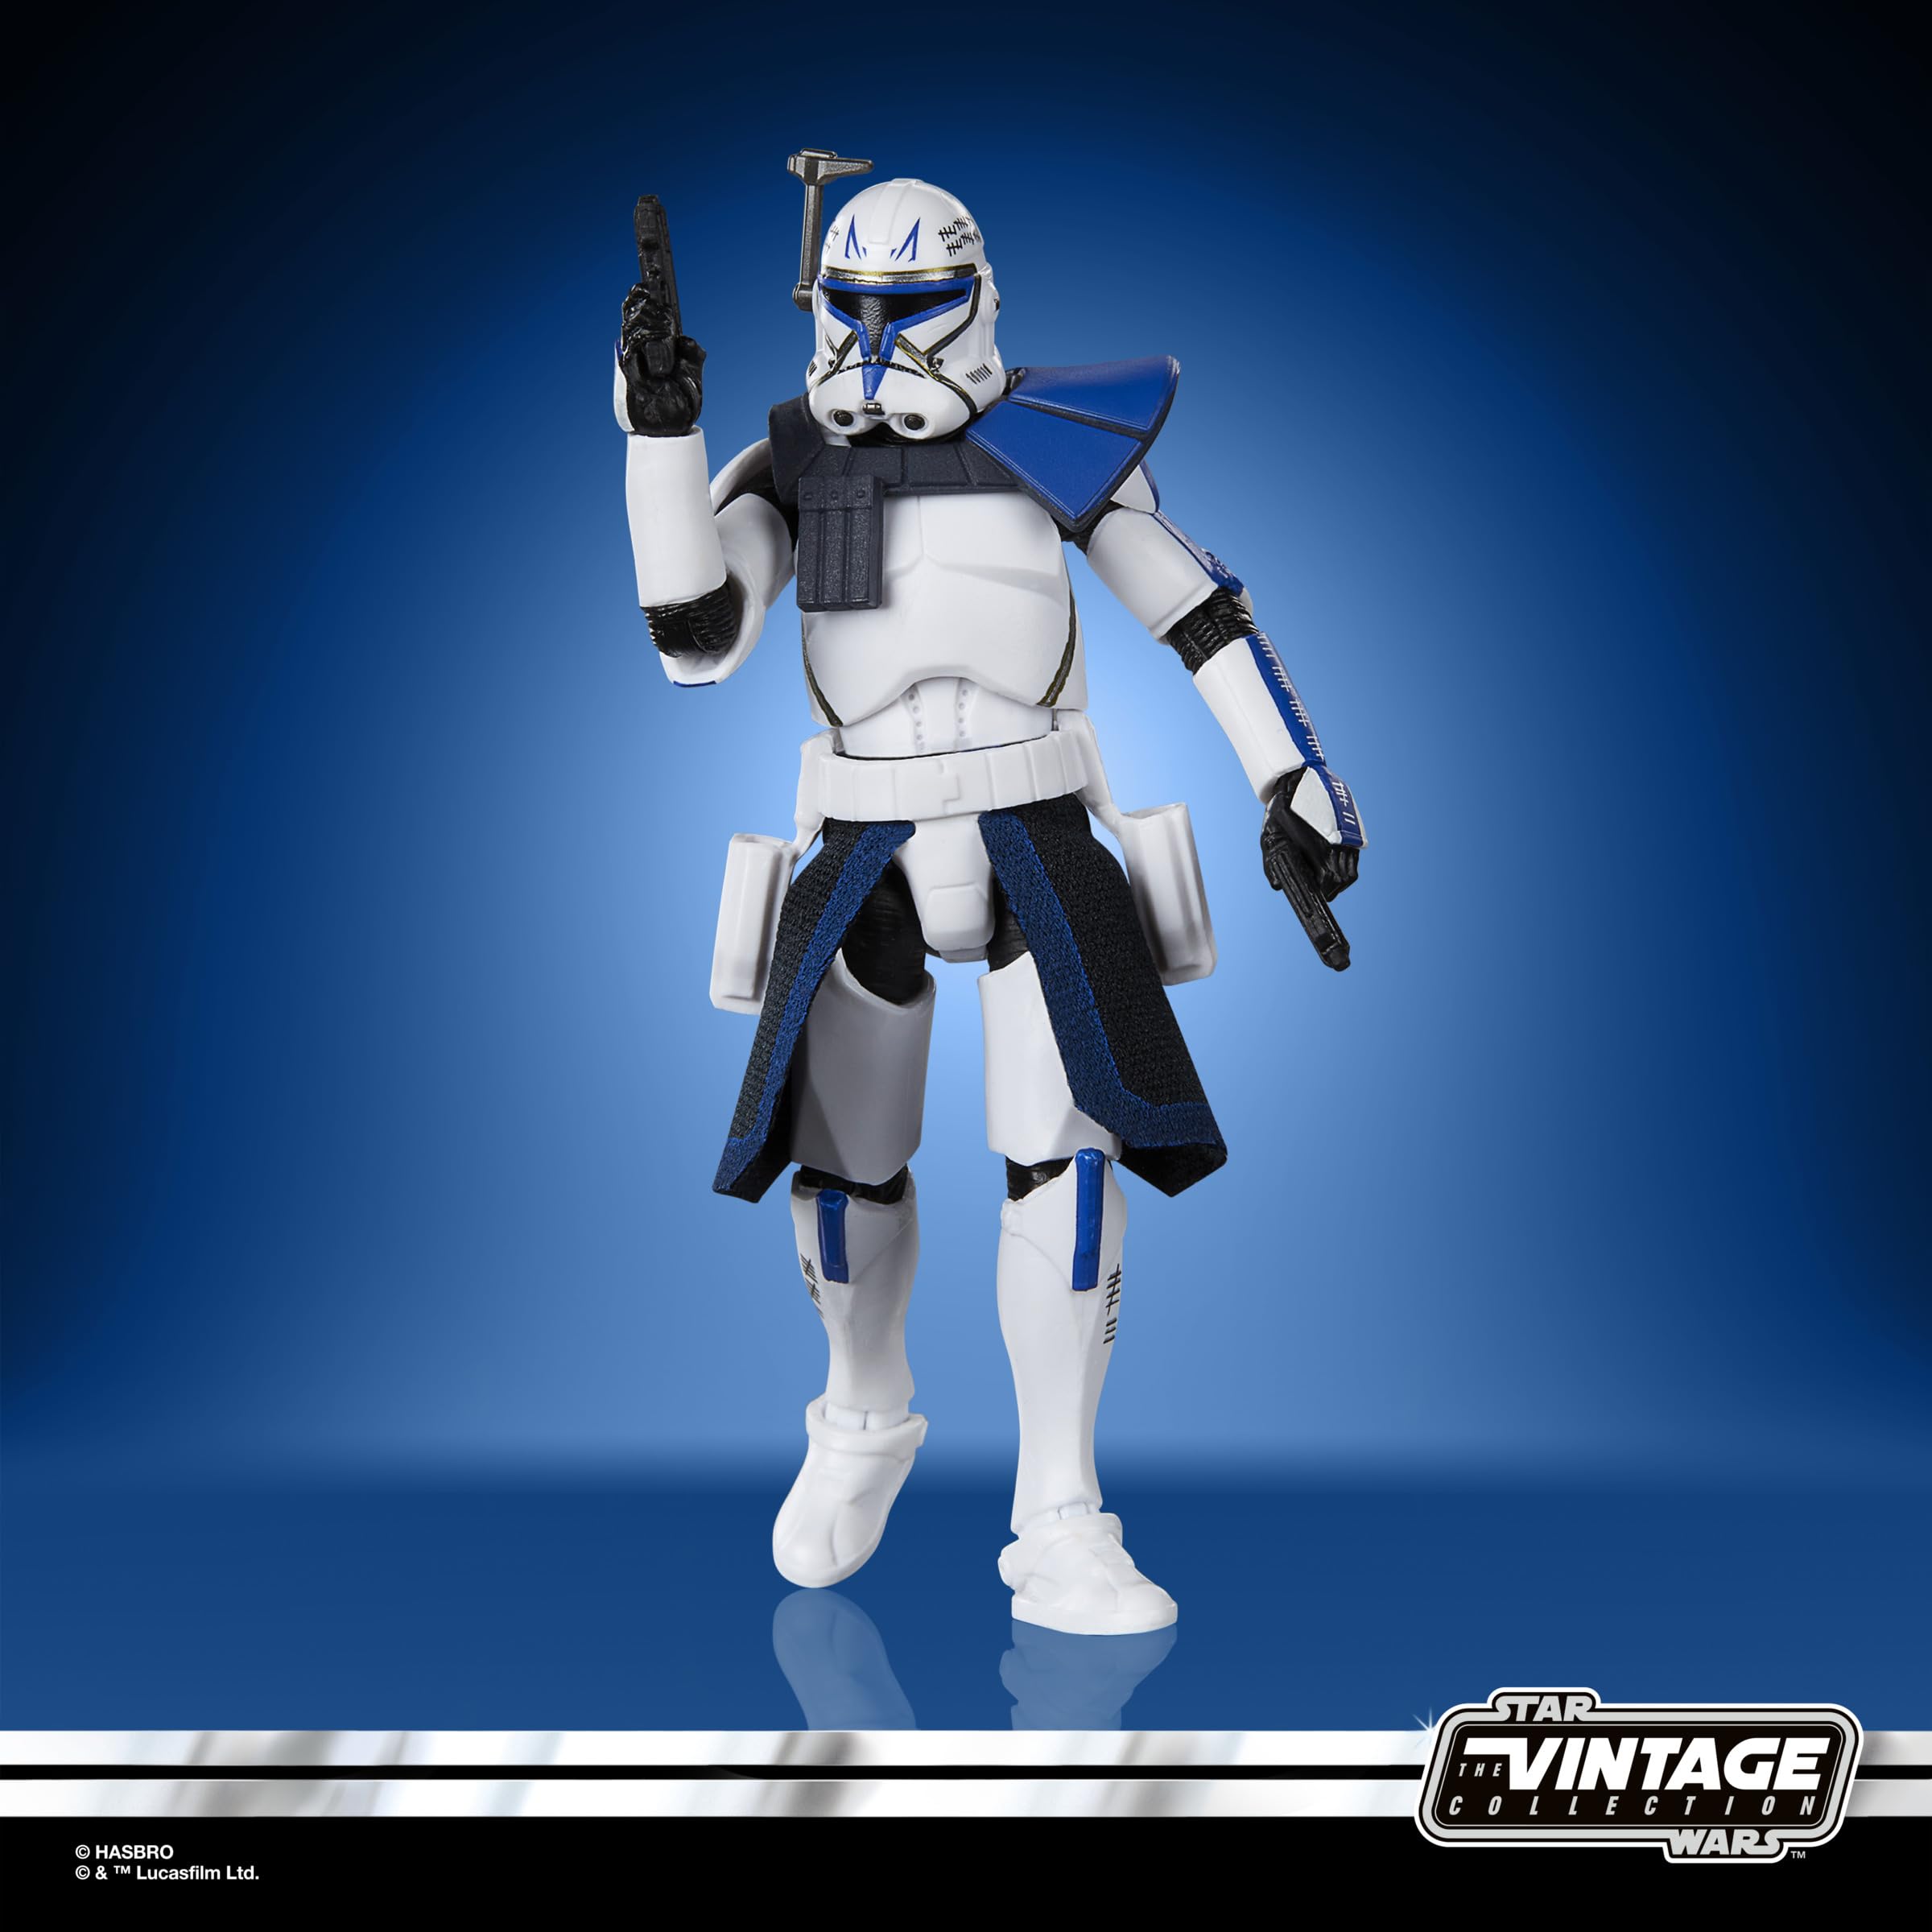 STAR WARS The Vintage Collection Clone Commander Rex (Bracca Mission), The Bad Batch 3.75 Inch Collectible Action Figure